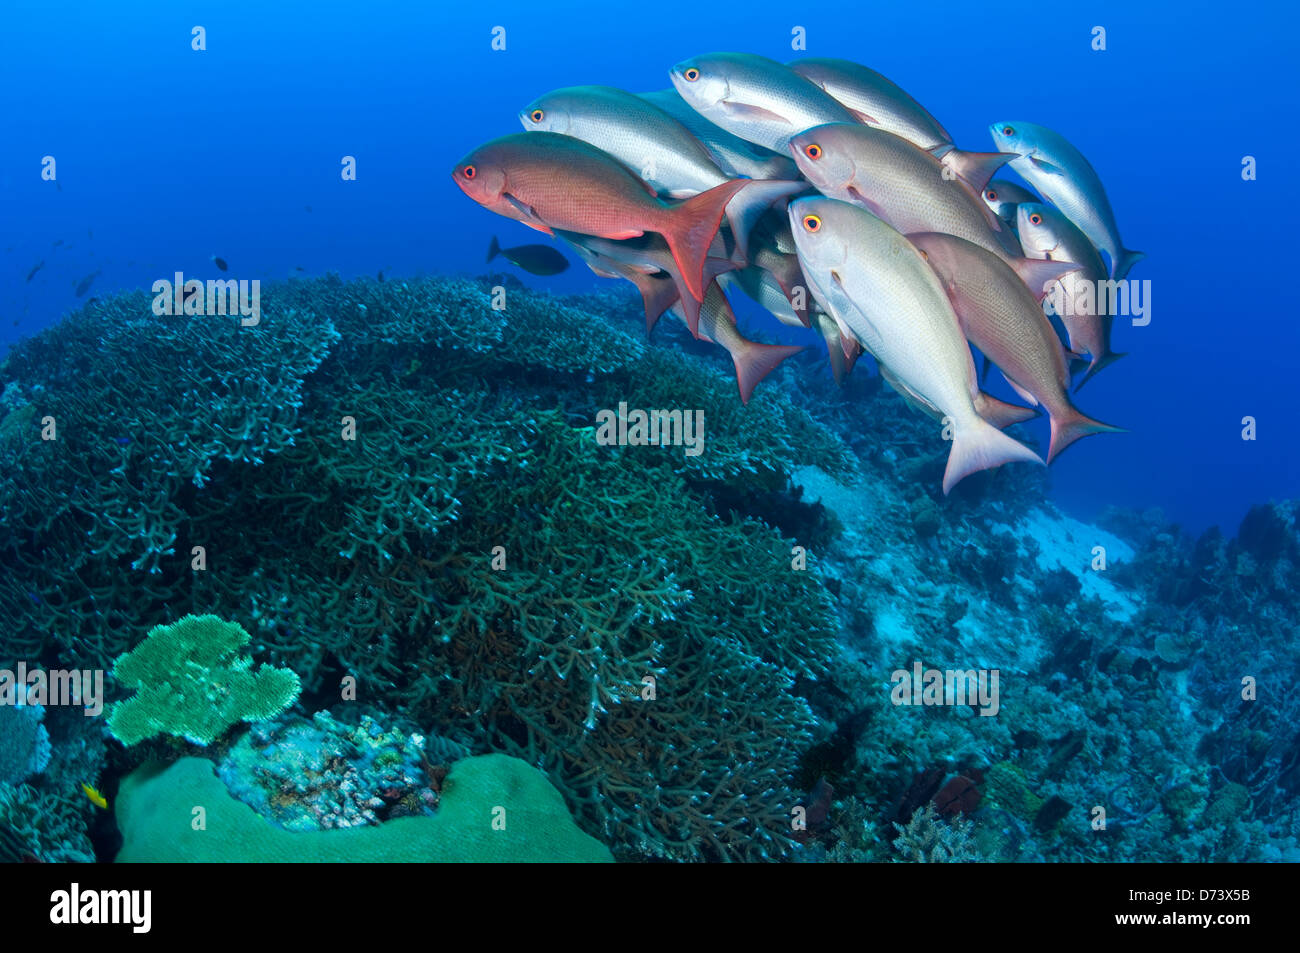 A school of pinjalo swim over a coral reef Stock Photo